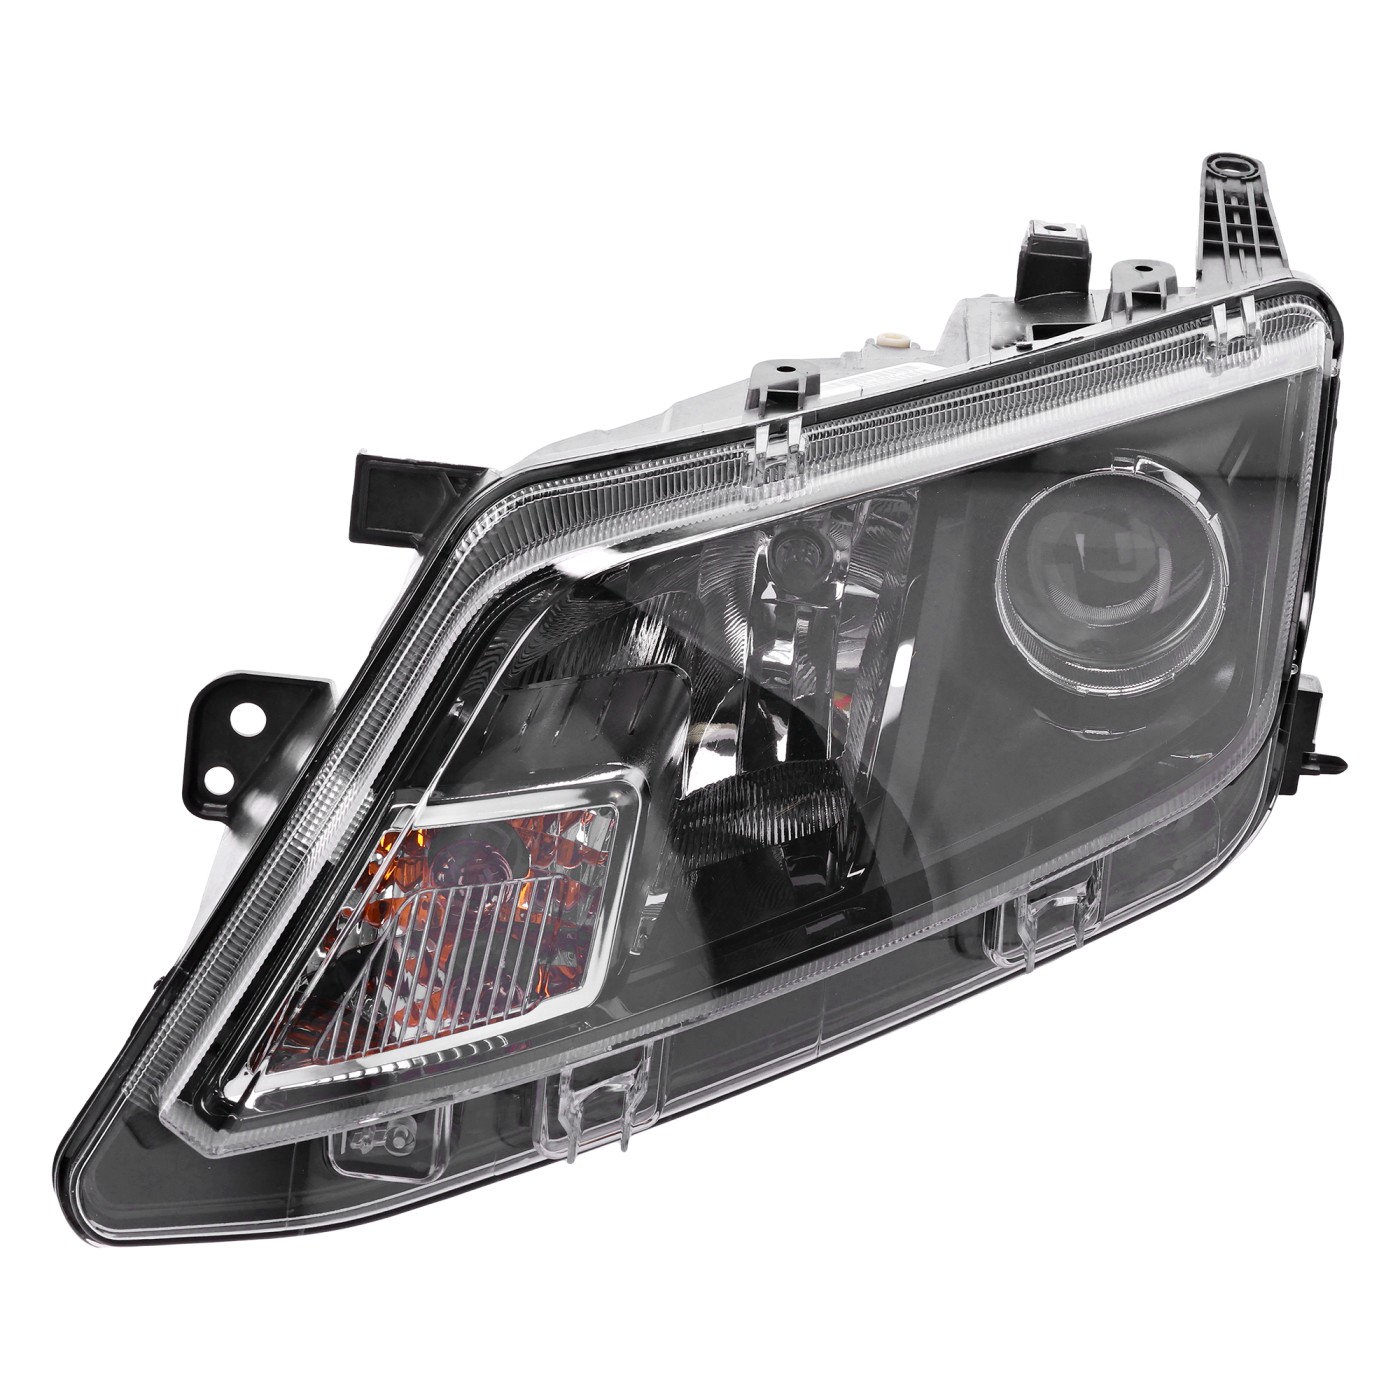 Headlight For 2010 2011 2012 Ford Fusion Left Black Housing With Bulb | eBay 2011 Ford Fusion Passenger Headlight Bulb Replacement